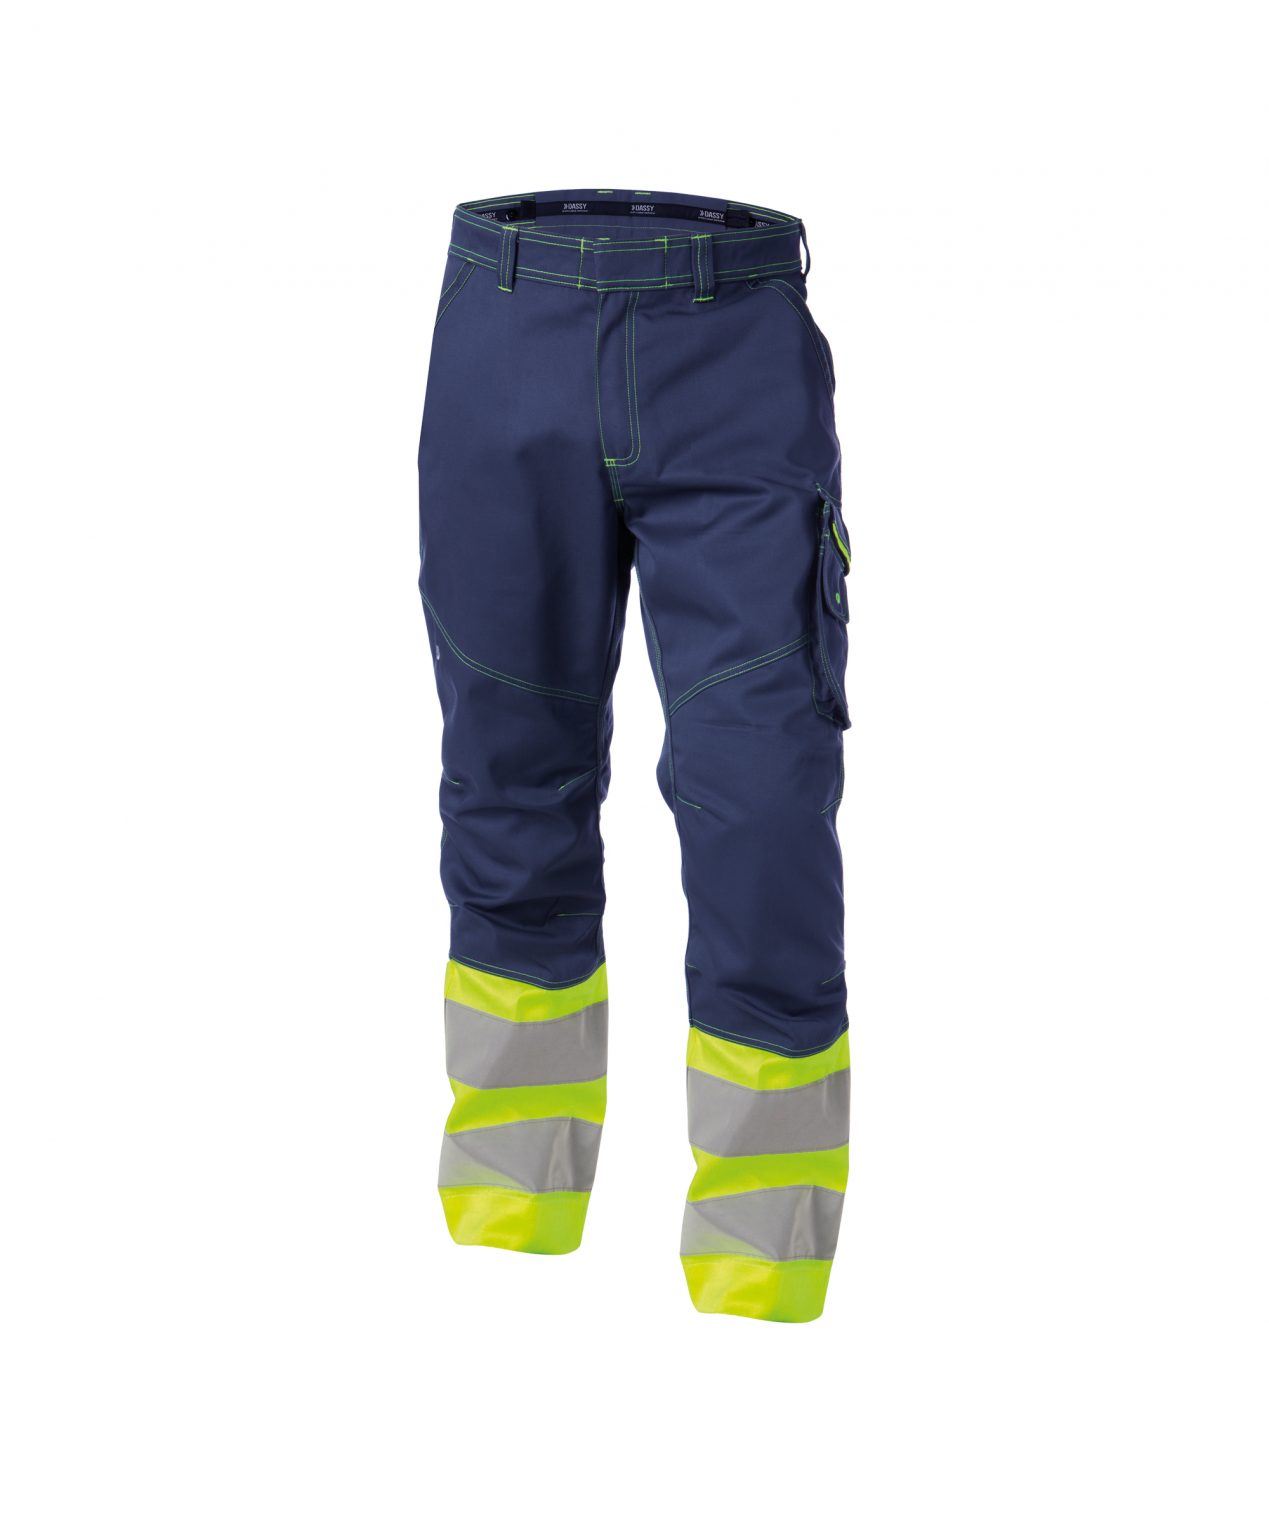 phoenix high visibility work trousers navy fluo yellow front